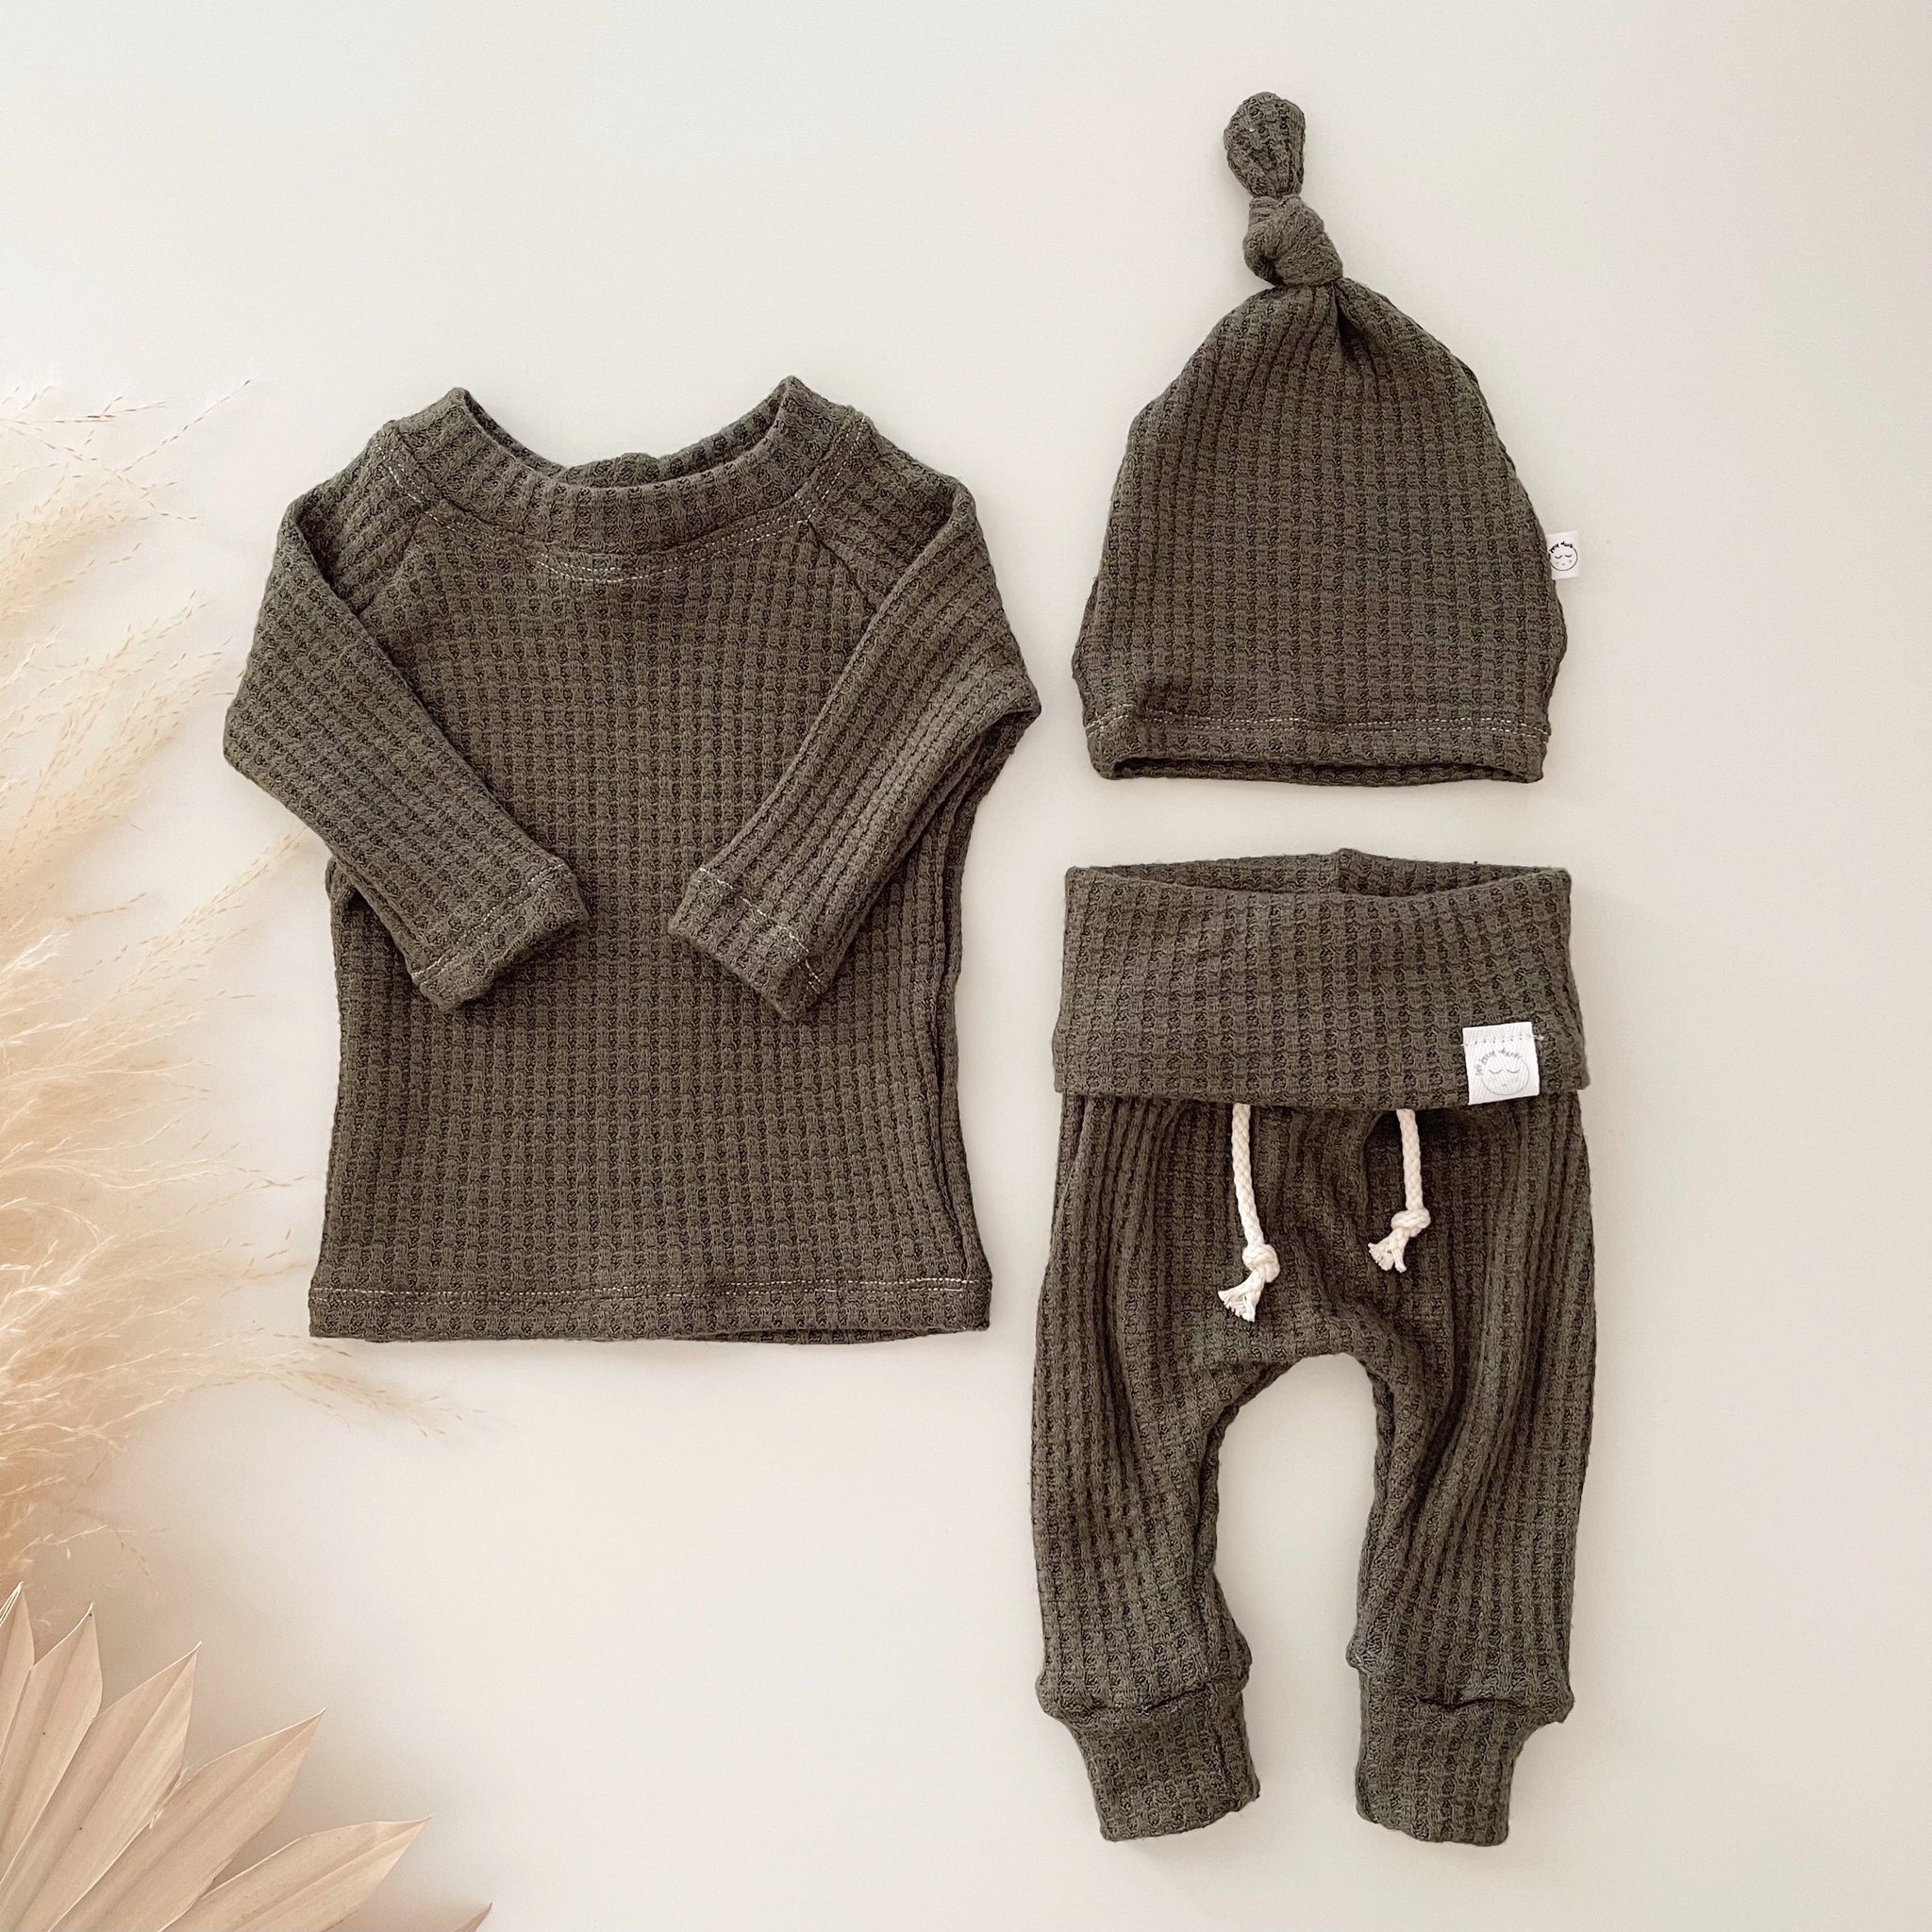 Newborn Baby Coming Home Outfit Knit Newborn Boy Outfit Newborn